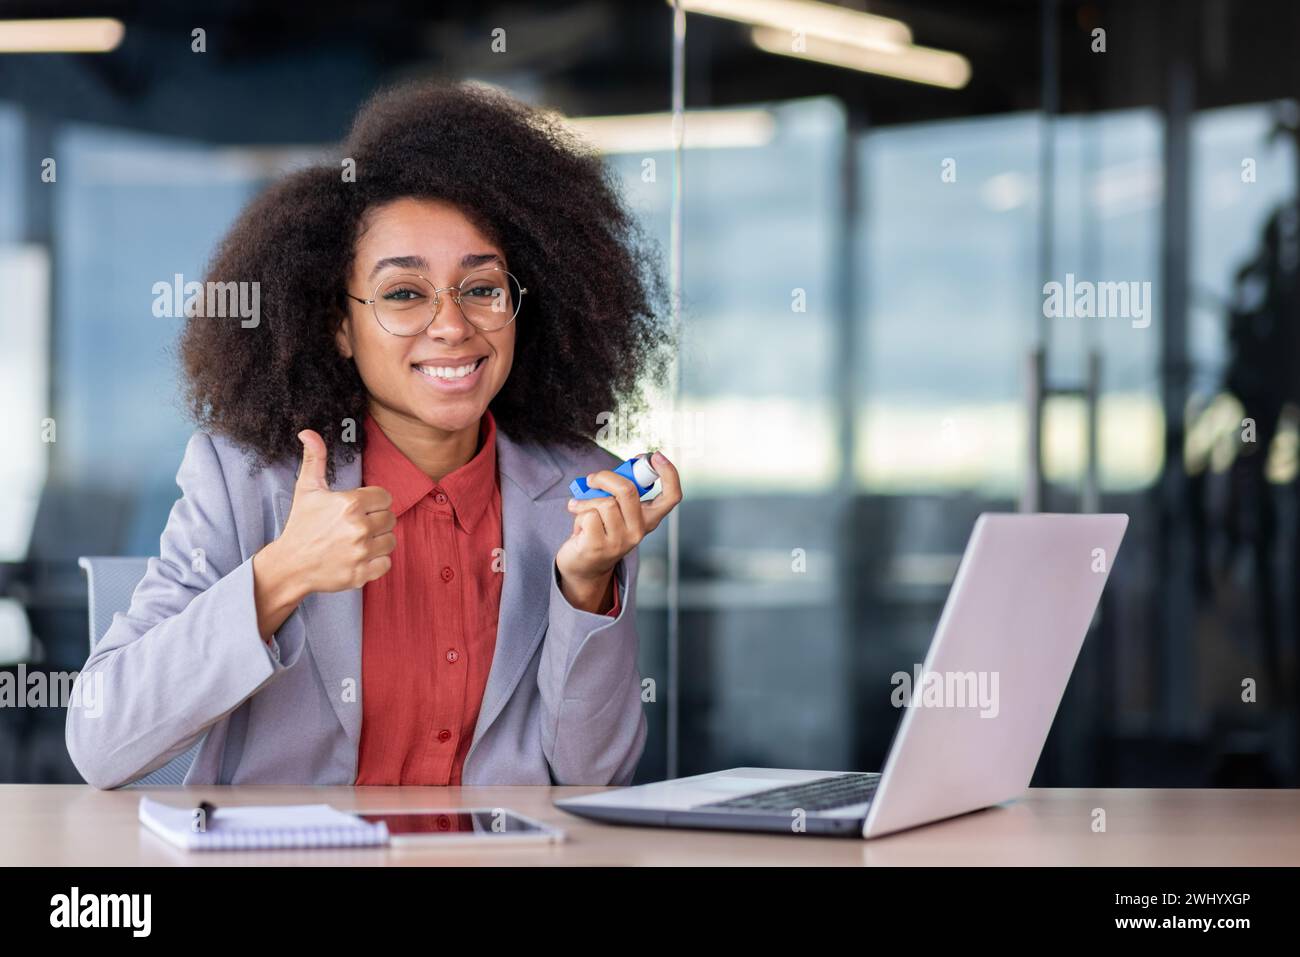 Relieved latino lady in business suit showing thumb um gesture and holding asthmatic aerosol while sitting in cabinet. Smiling administrator feeling better after dealing with bronchial disease attack. Stock Photo